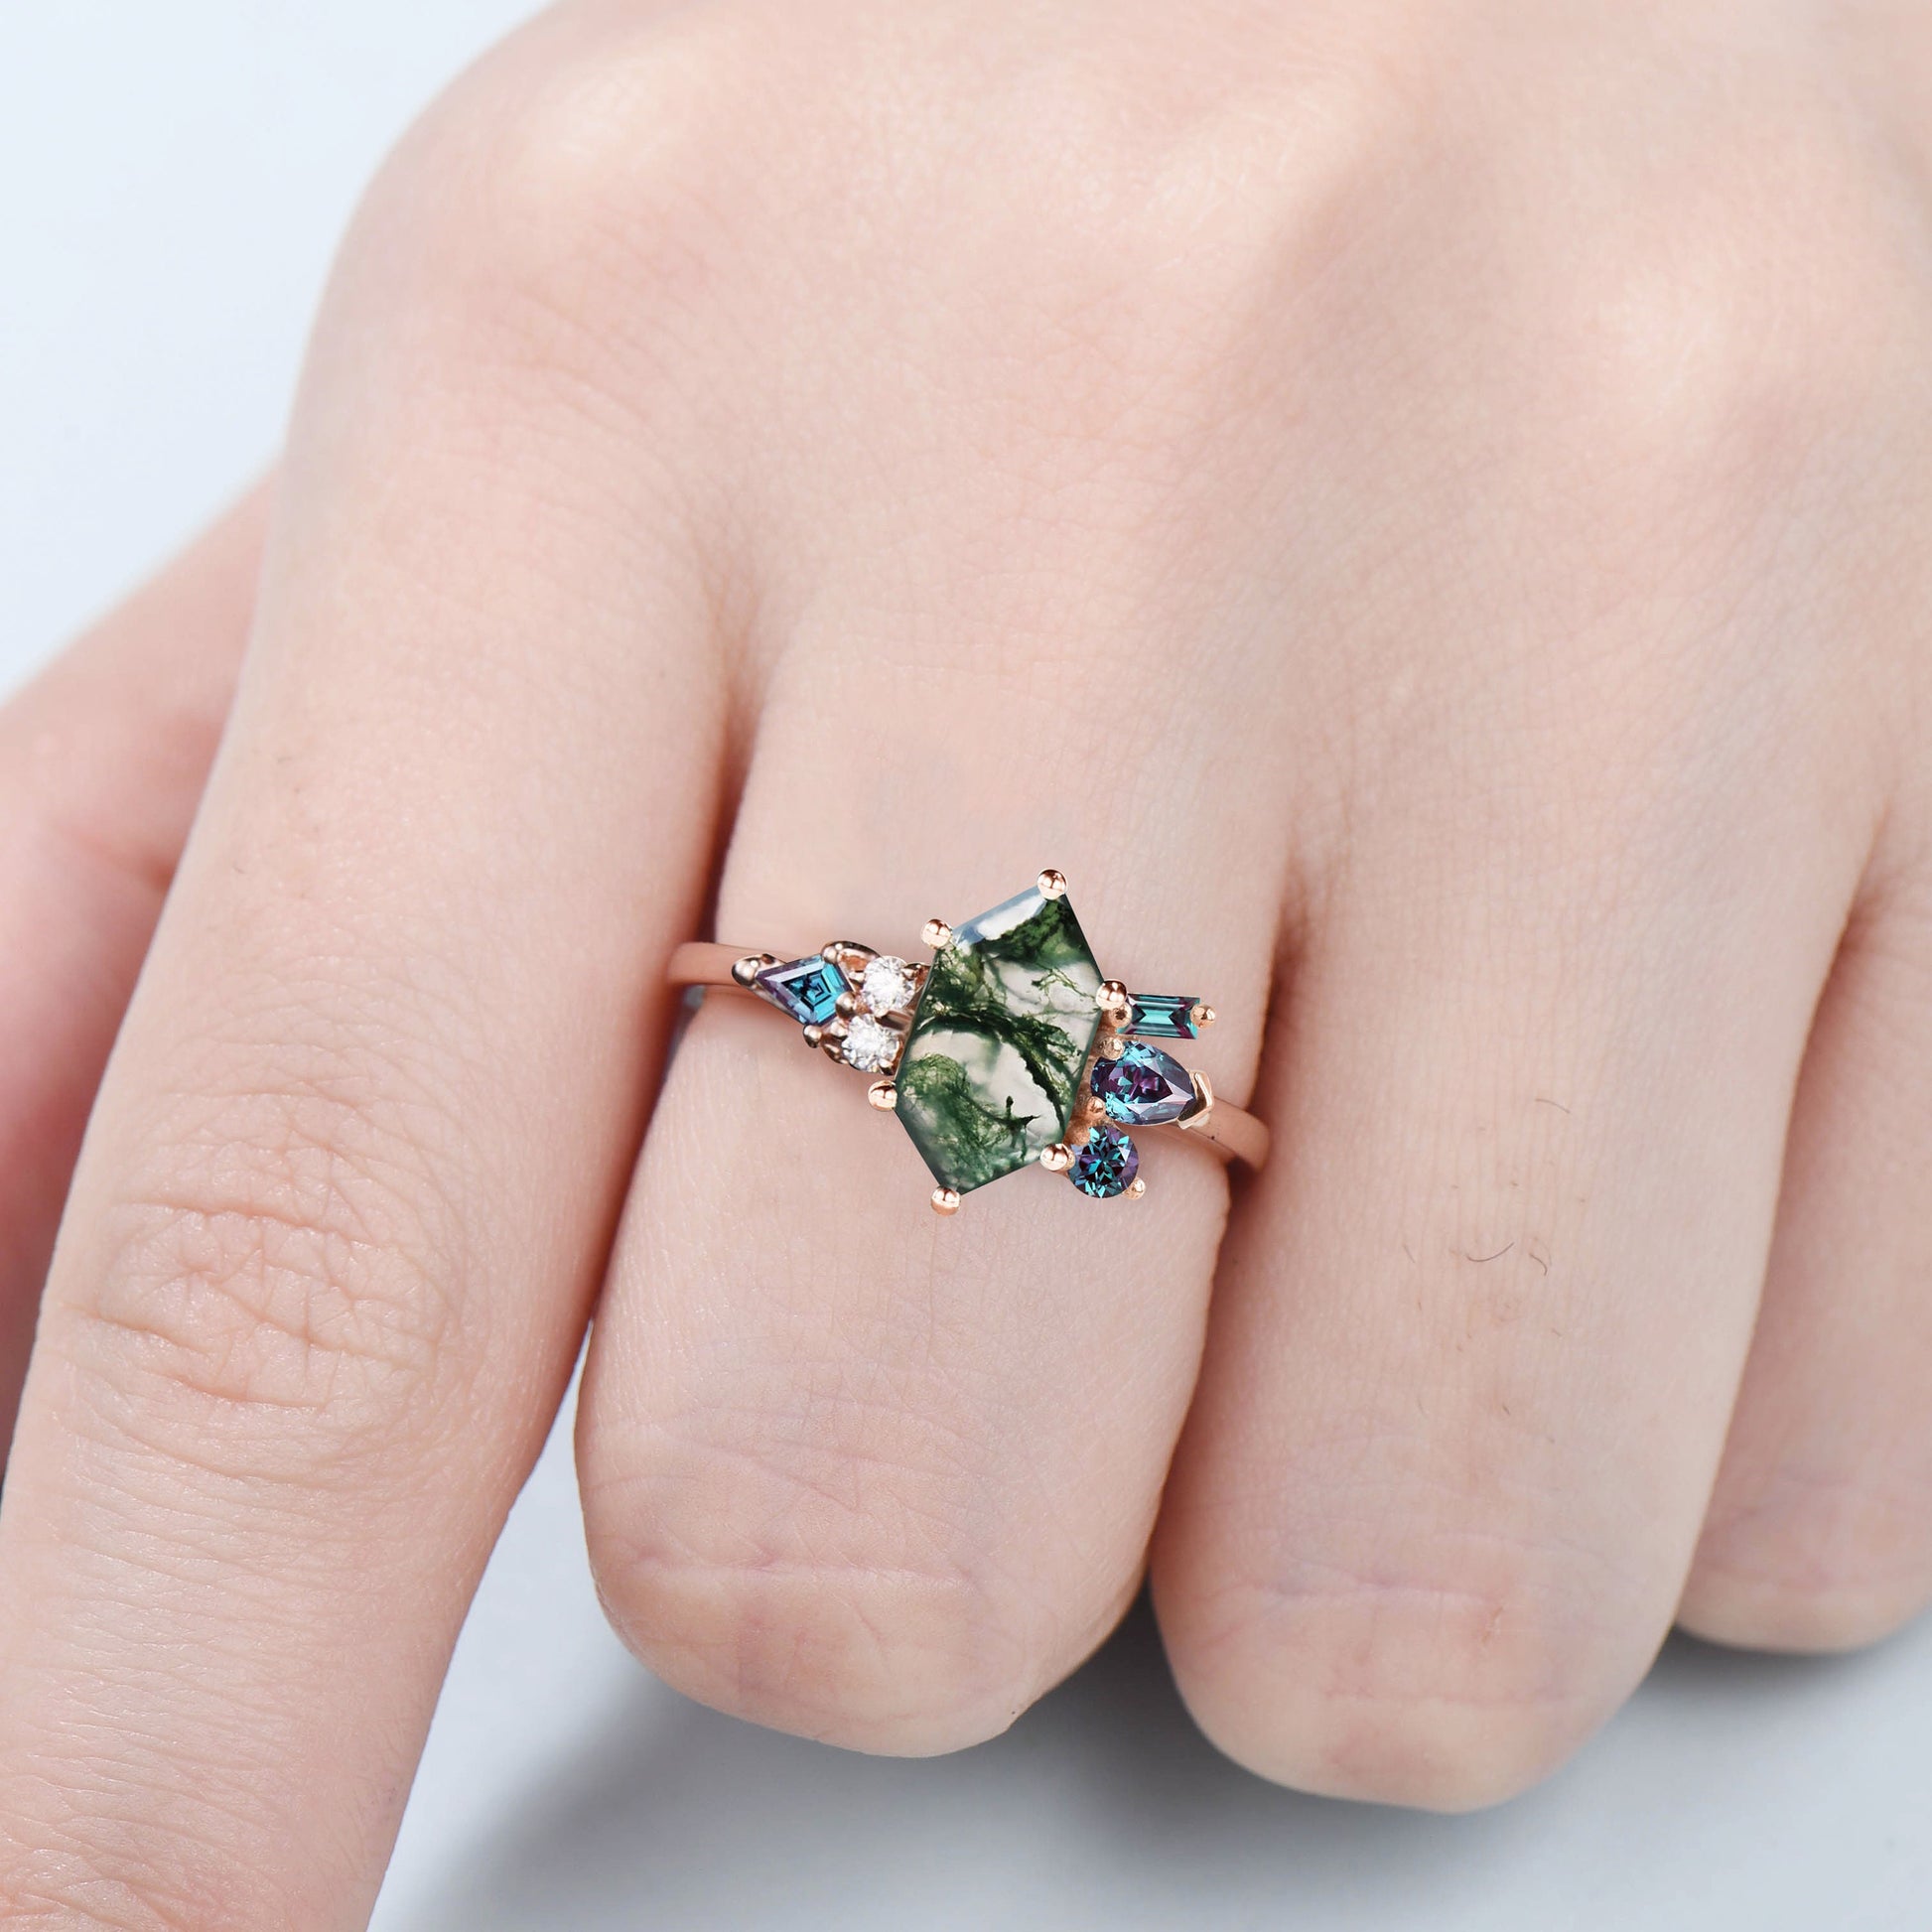 Vintage Long hexagon cut moss agate ring Unique Green Agate engagement ring cluster alexandrite wedding ring art deco proposal gifts women - PENFINE